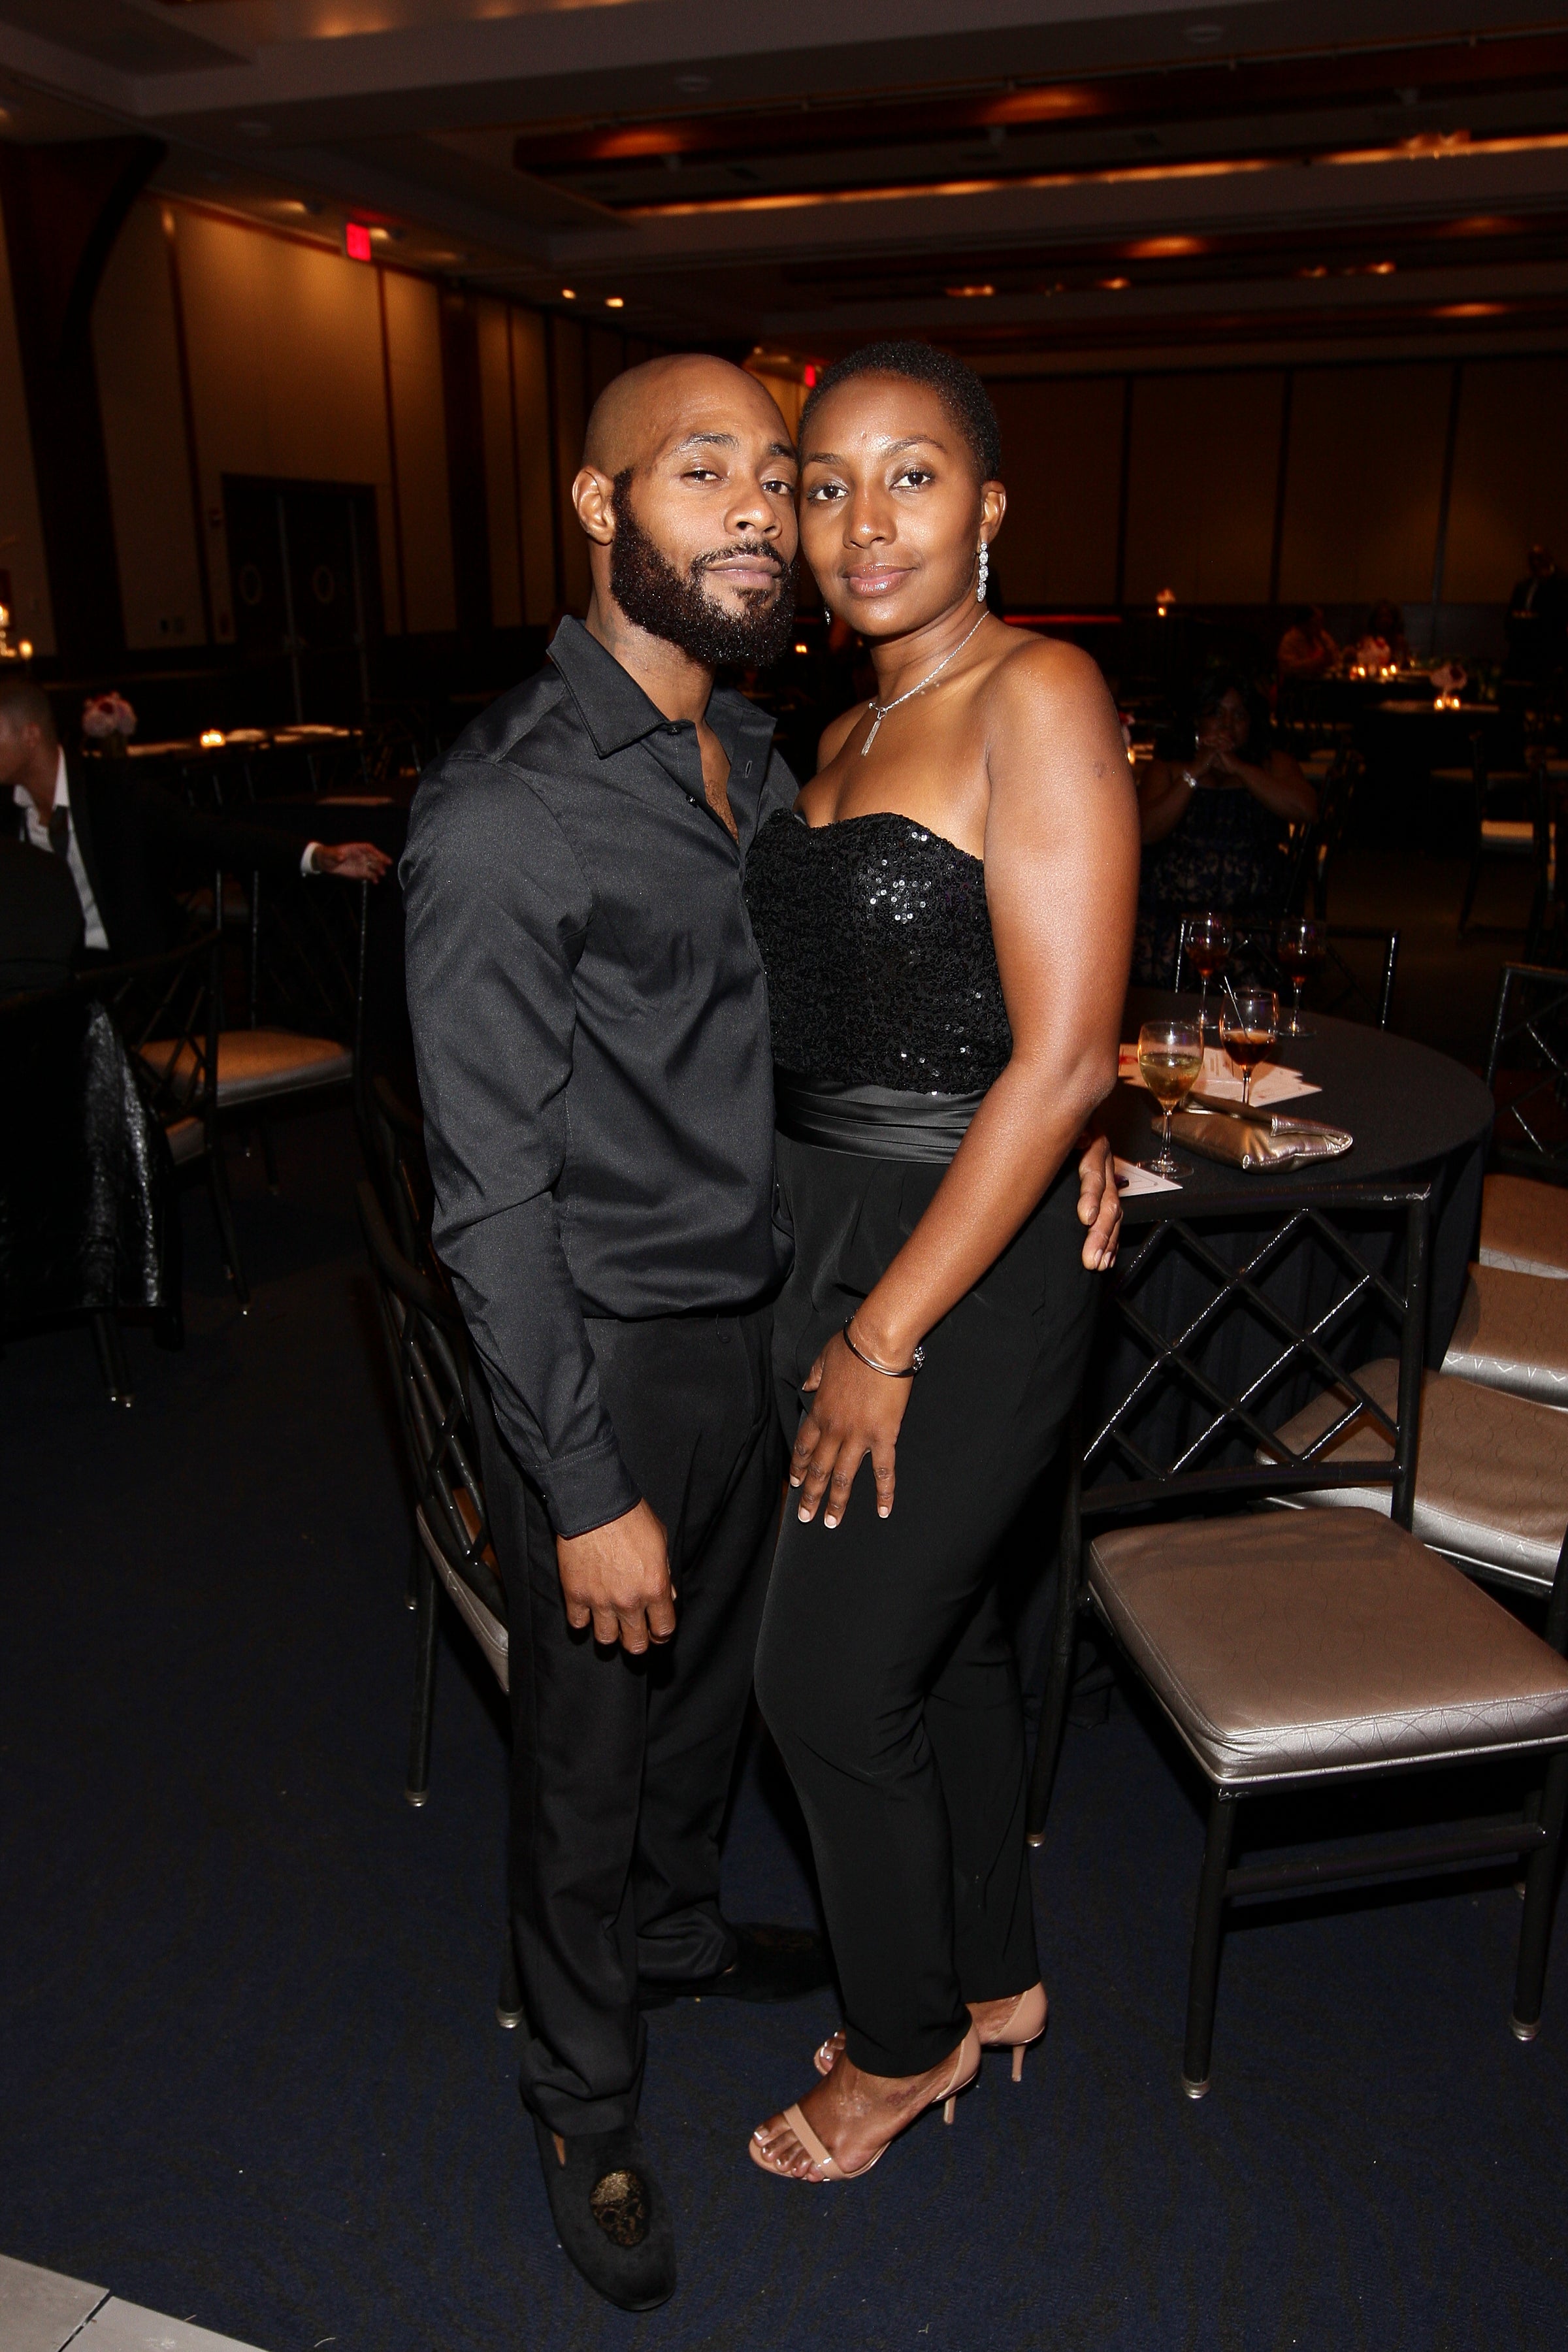 These Couples Came Out To Celebrate and Spread Love at ESSENCE's Black Love Gala In NYC